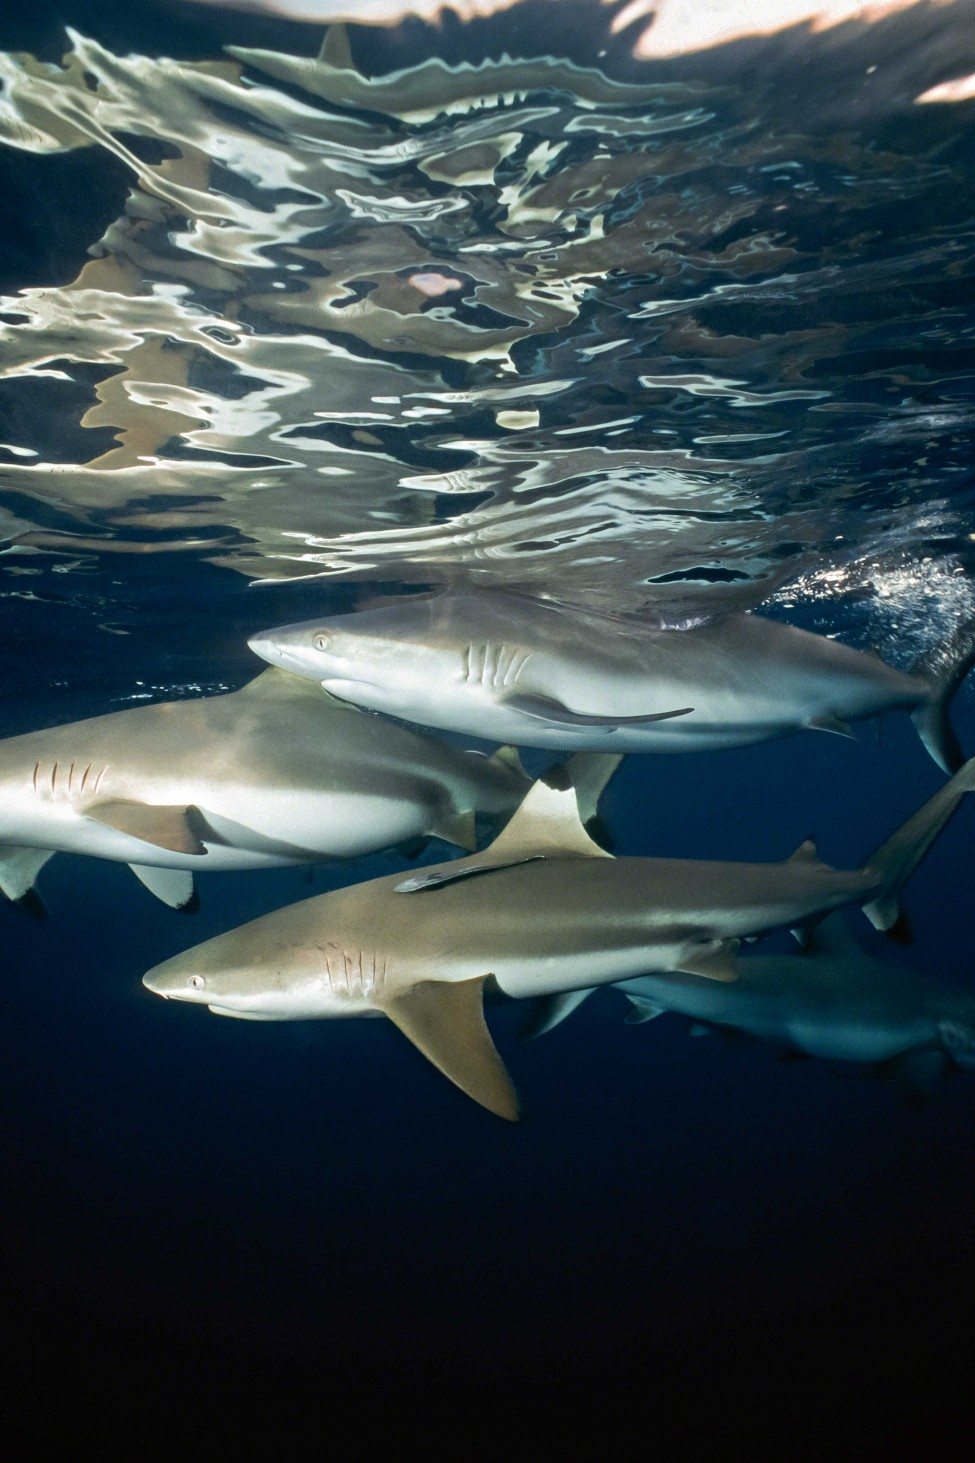 Blacktip reef sharks Carcharhinus melanopterus have found refuge in the giant marine protected area designated by the island nation of Palau in the Western Pacific Ocean.<br />
Photo by Doug Sloss | SeaPics.com